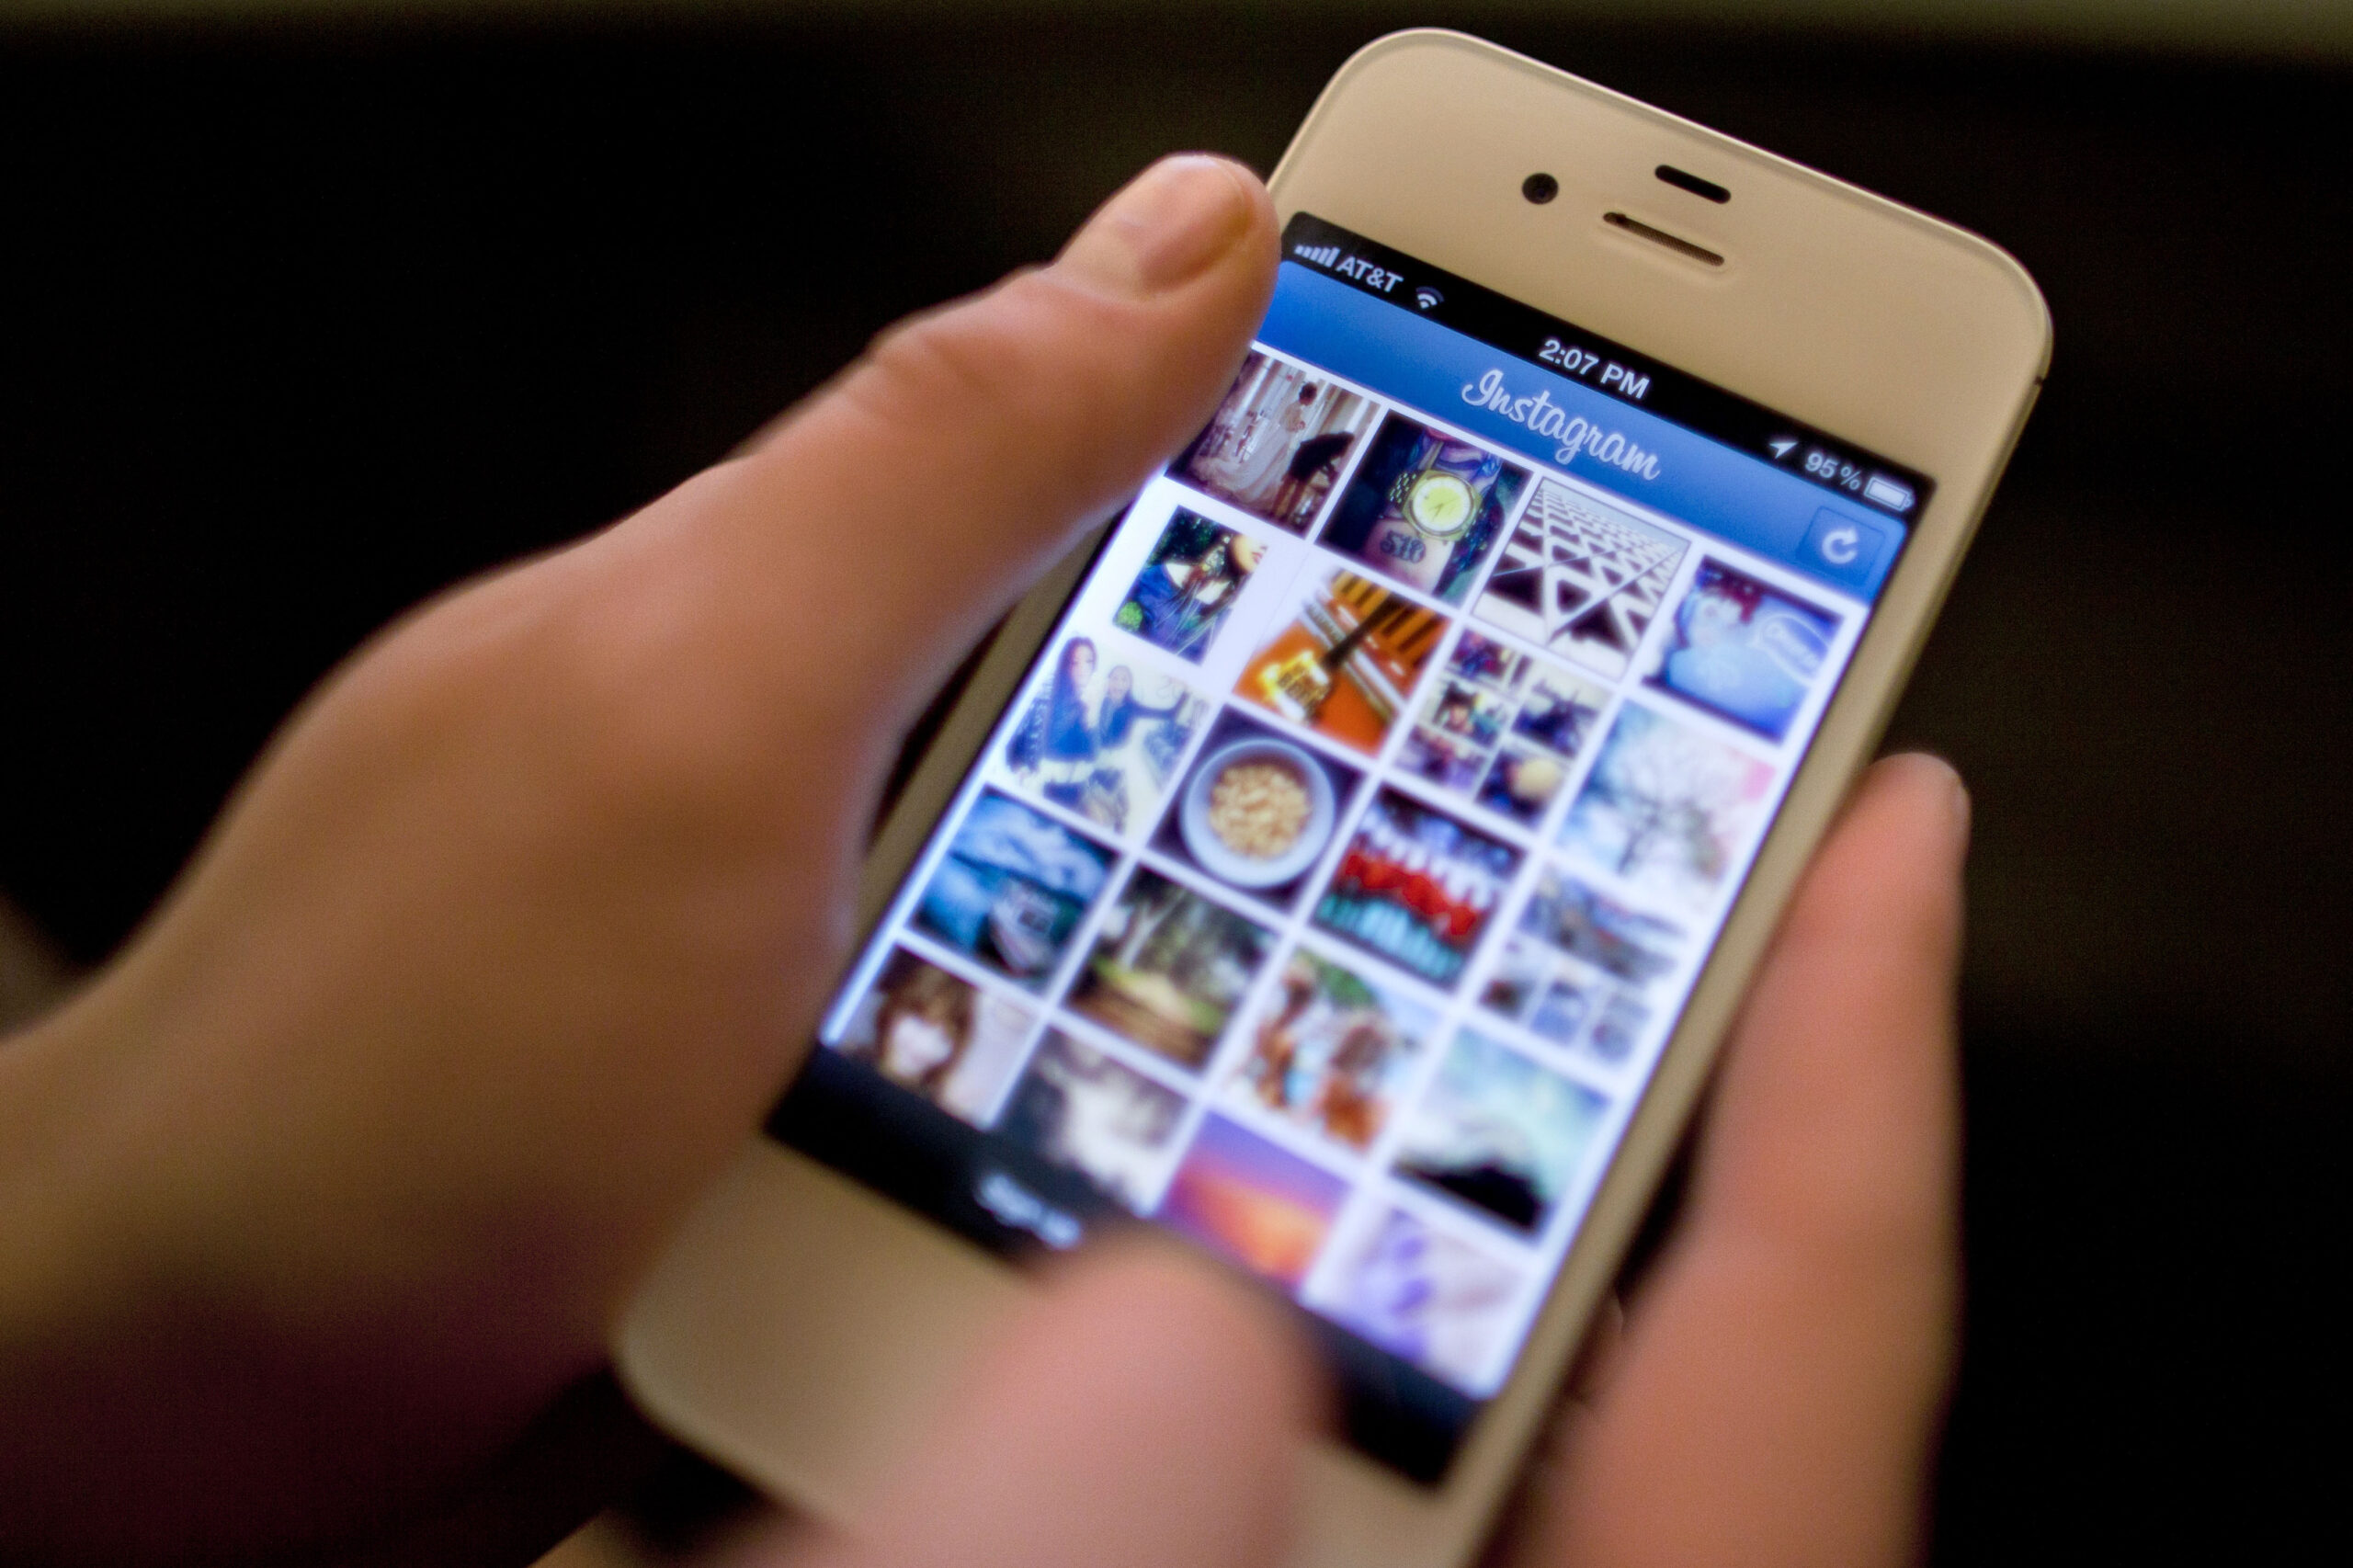 Twitter reportedly tried to buy Instagram for $ 525 million